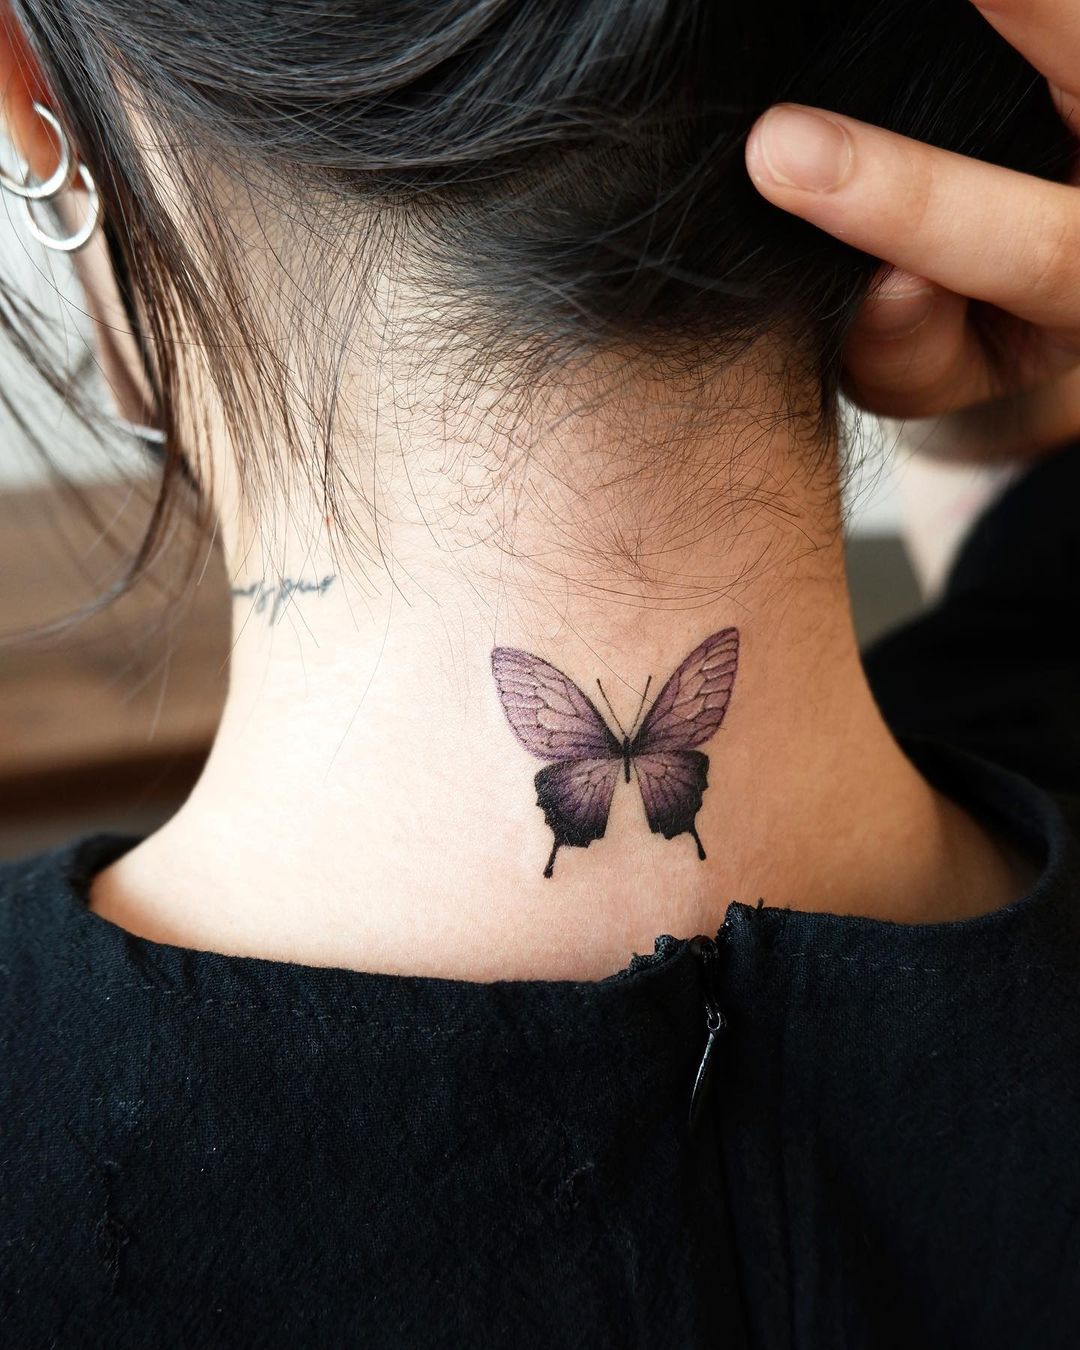 60+ spine tattoos for women that will make you do a double take (2022  designs) - Briefly.co.za